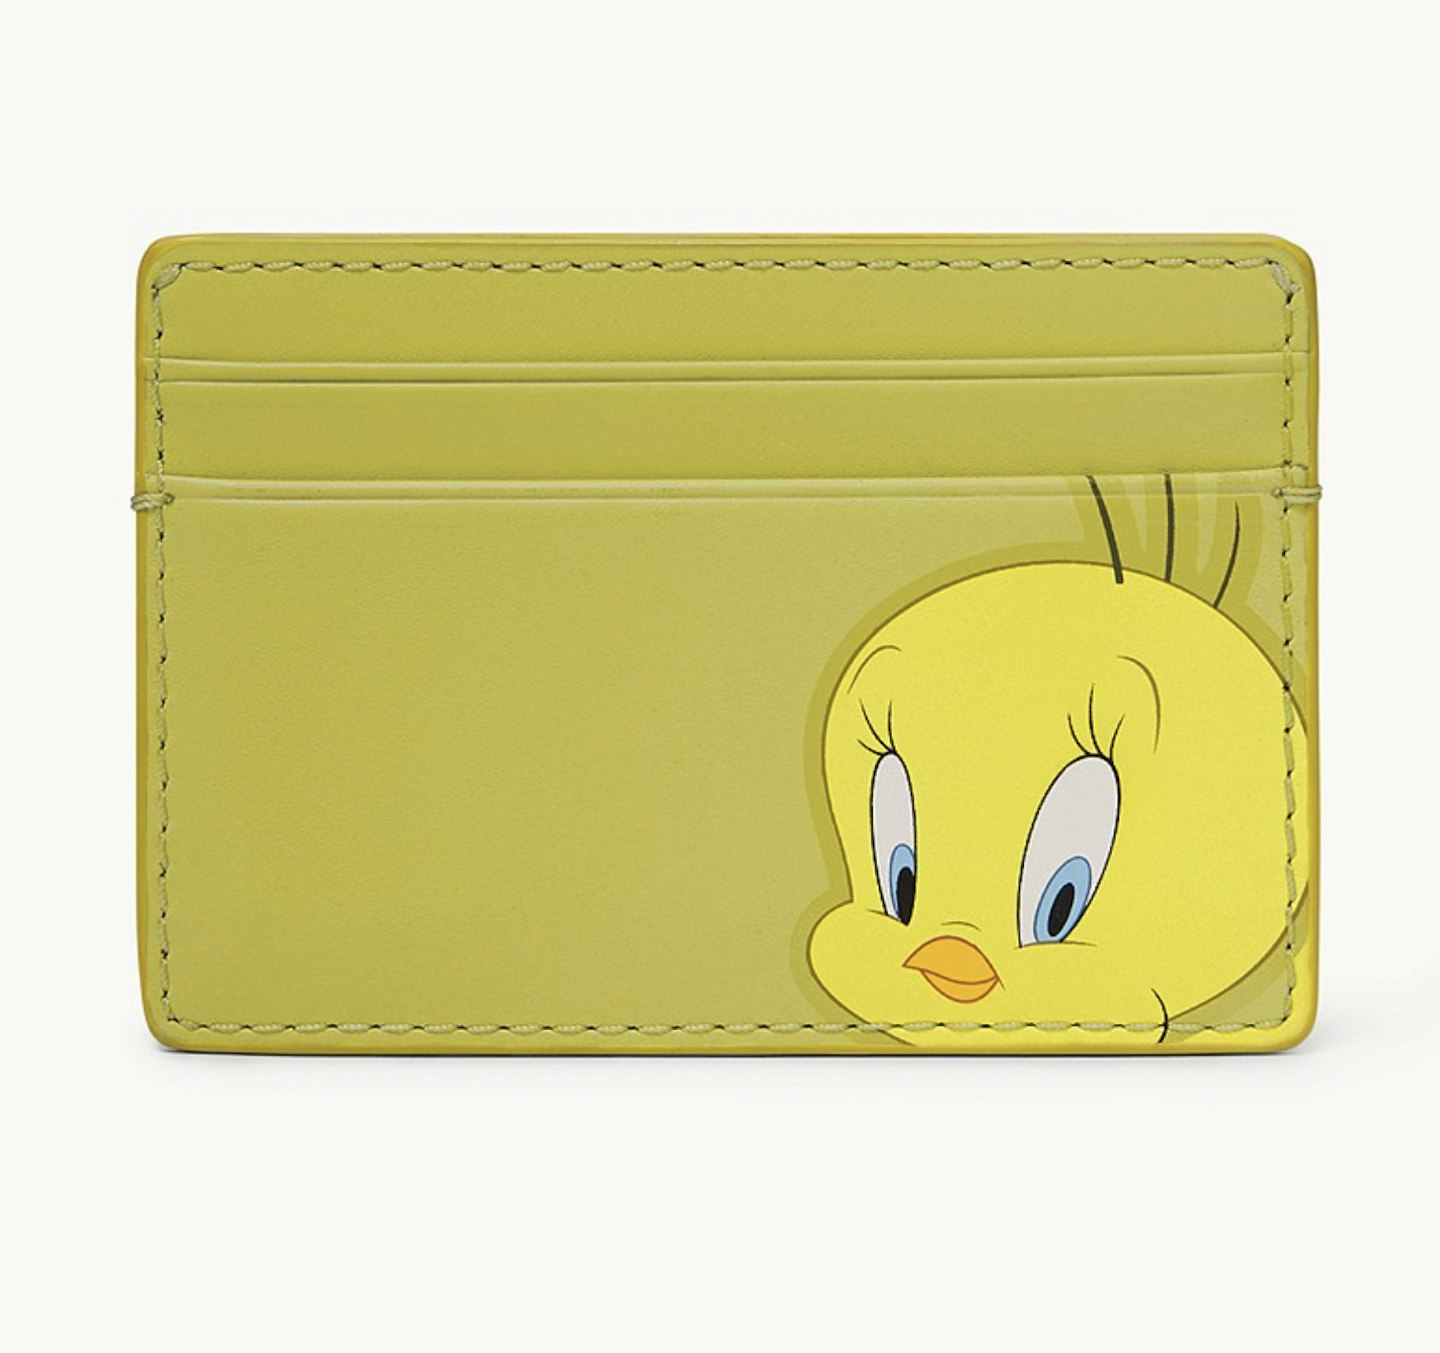 Space Jam by Fossil Tweety Card Case